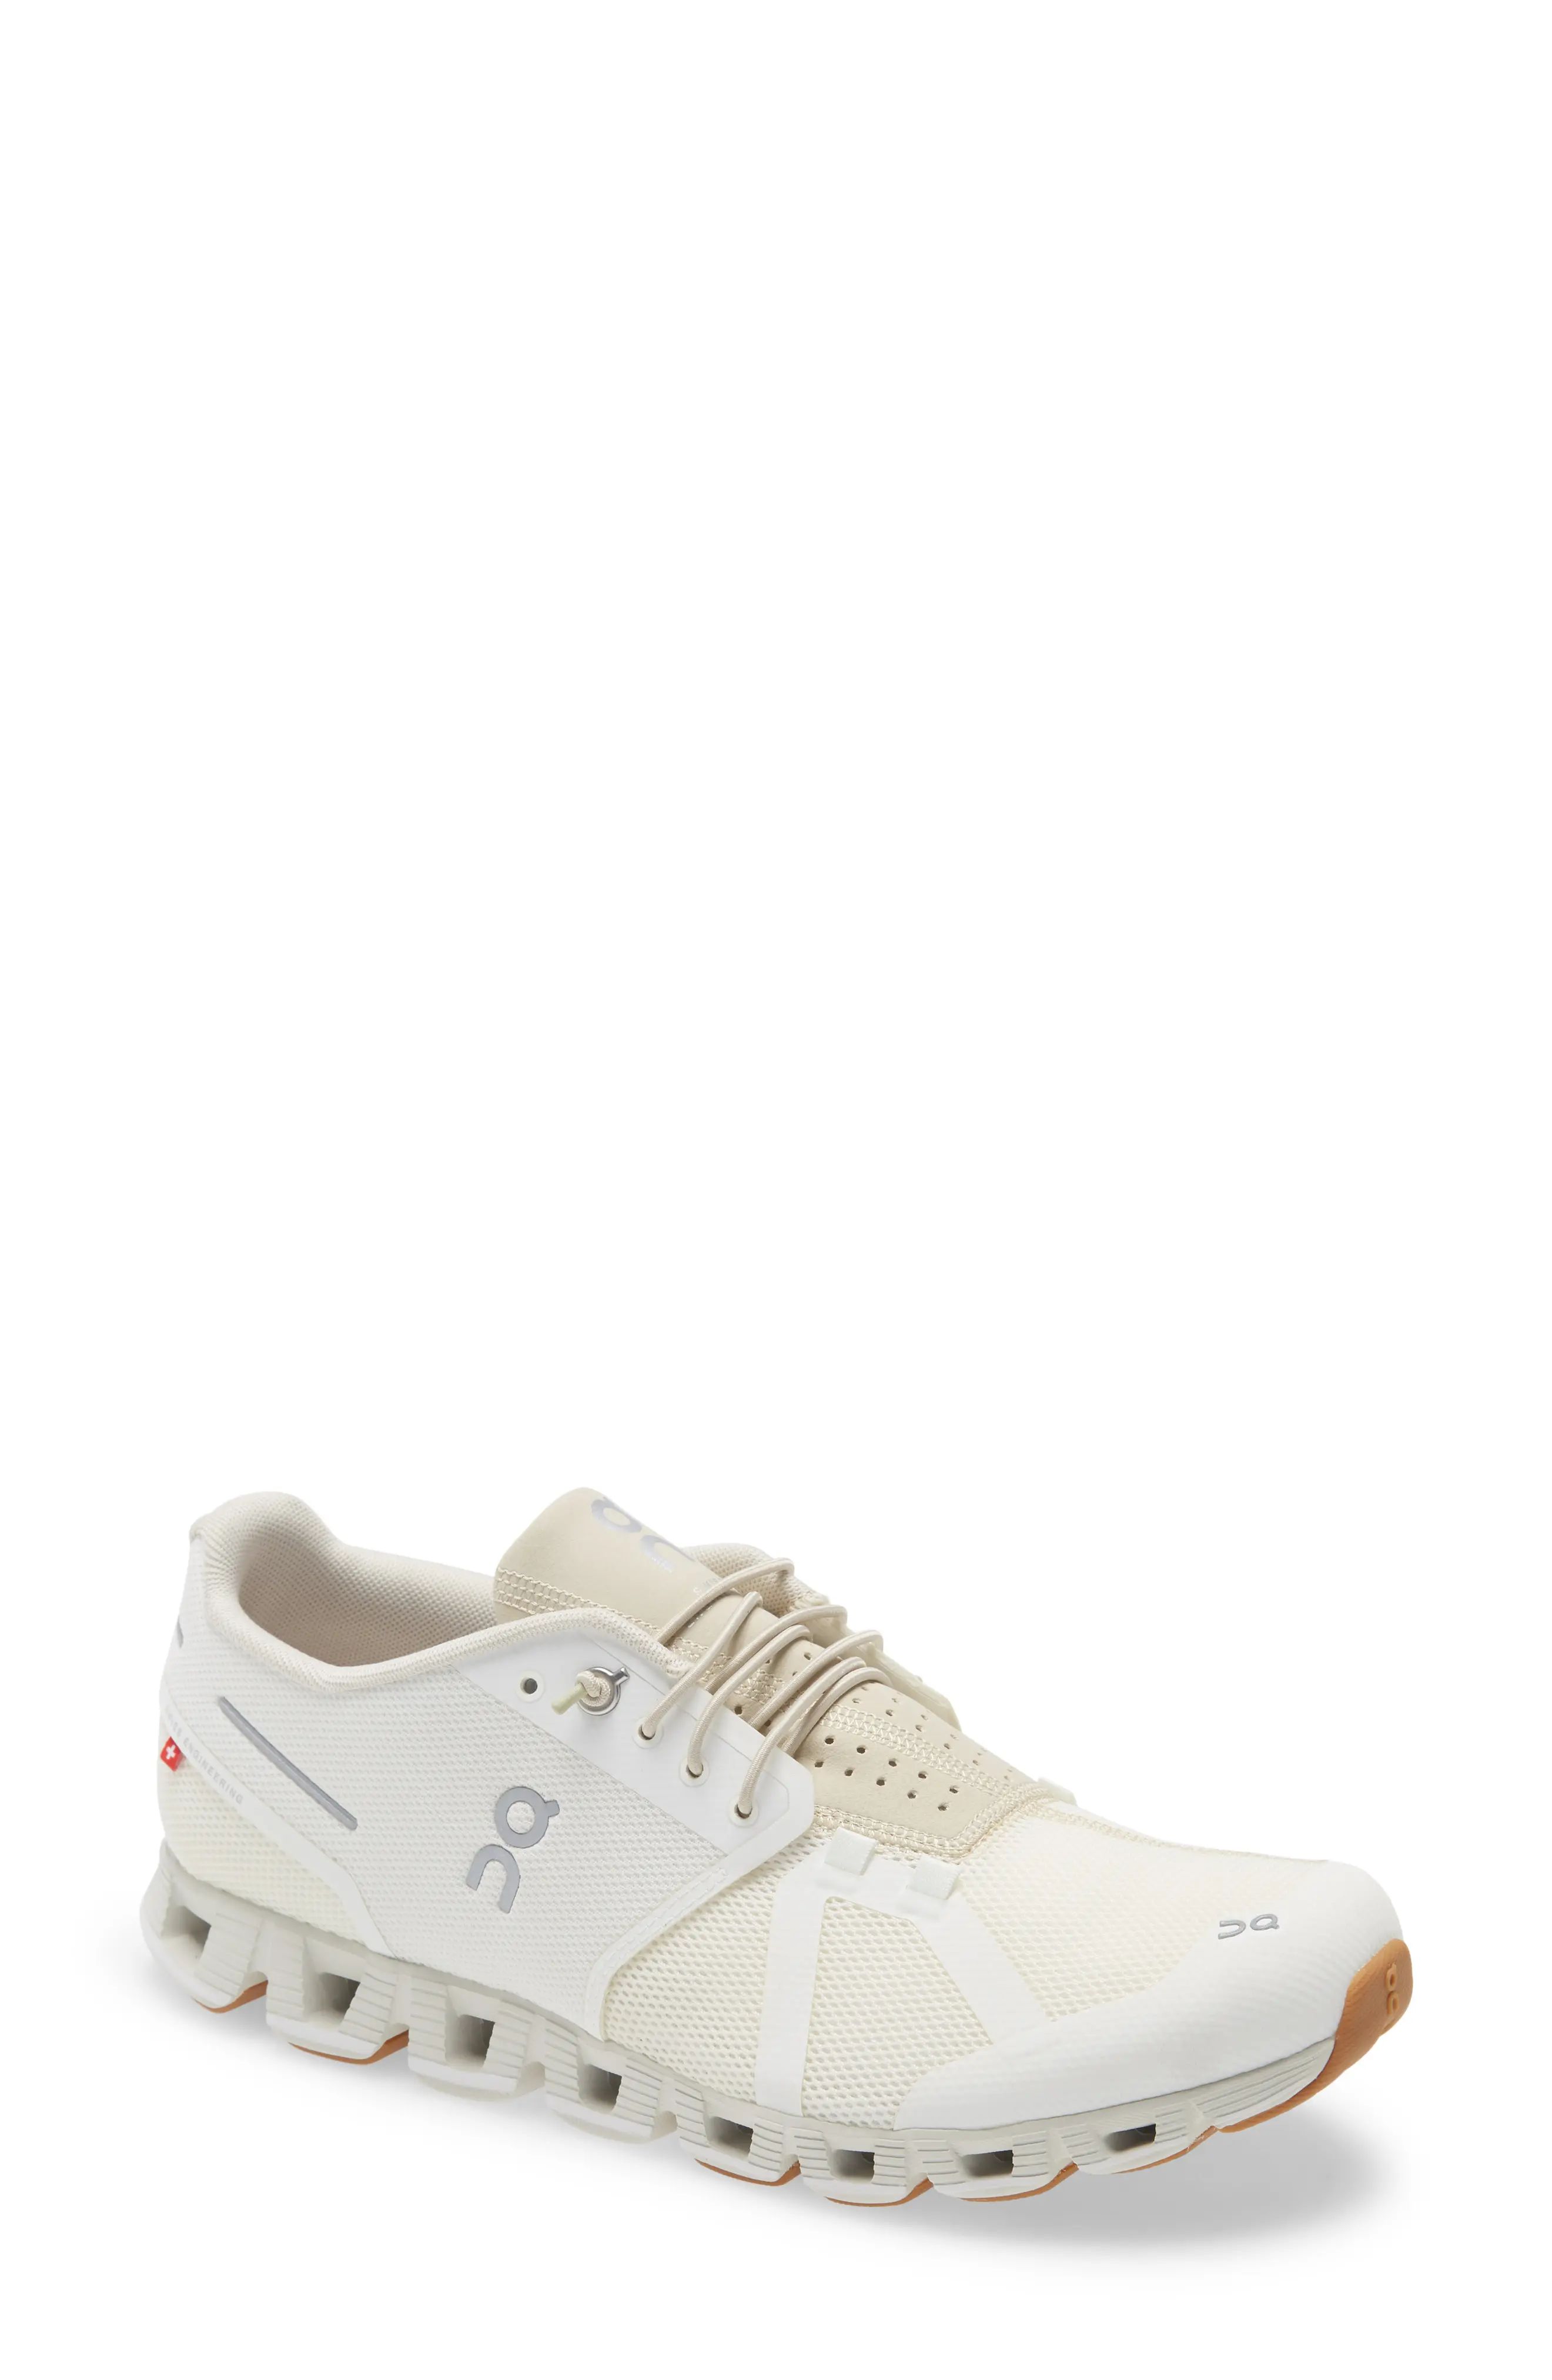 On Cloud Running Shoe, Size 7.5 in White/Beige at Nordstrom | Nordstrom